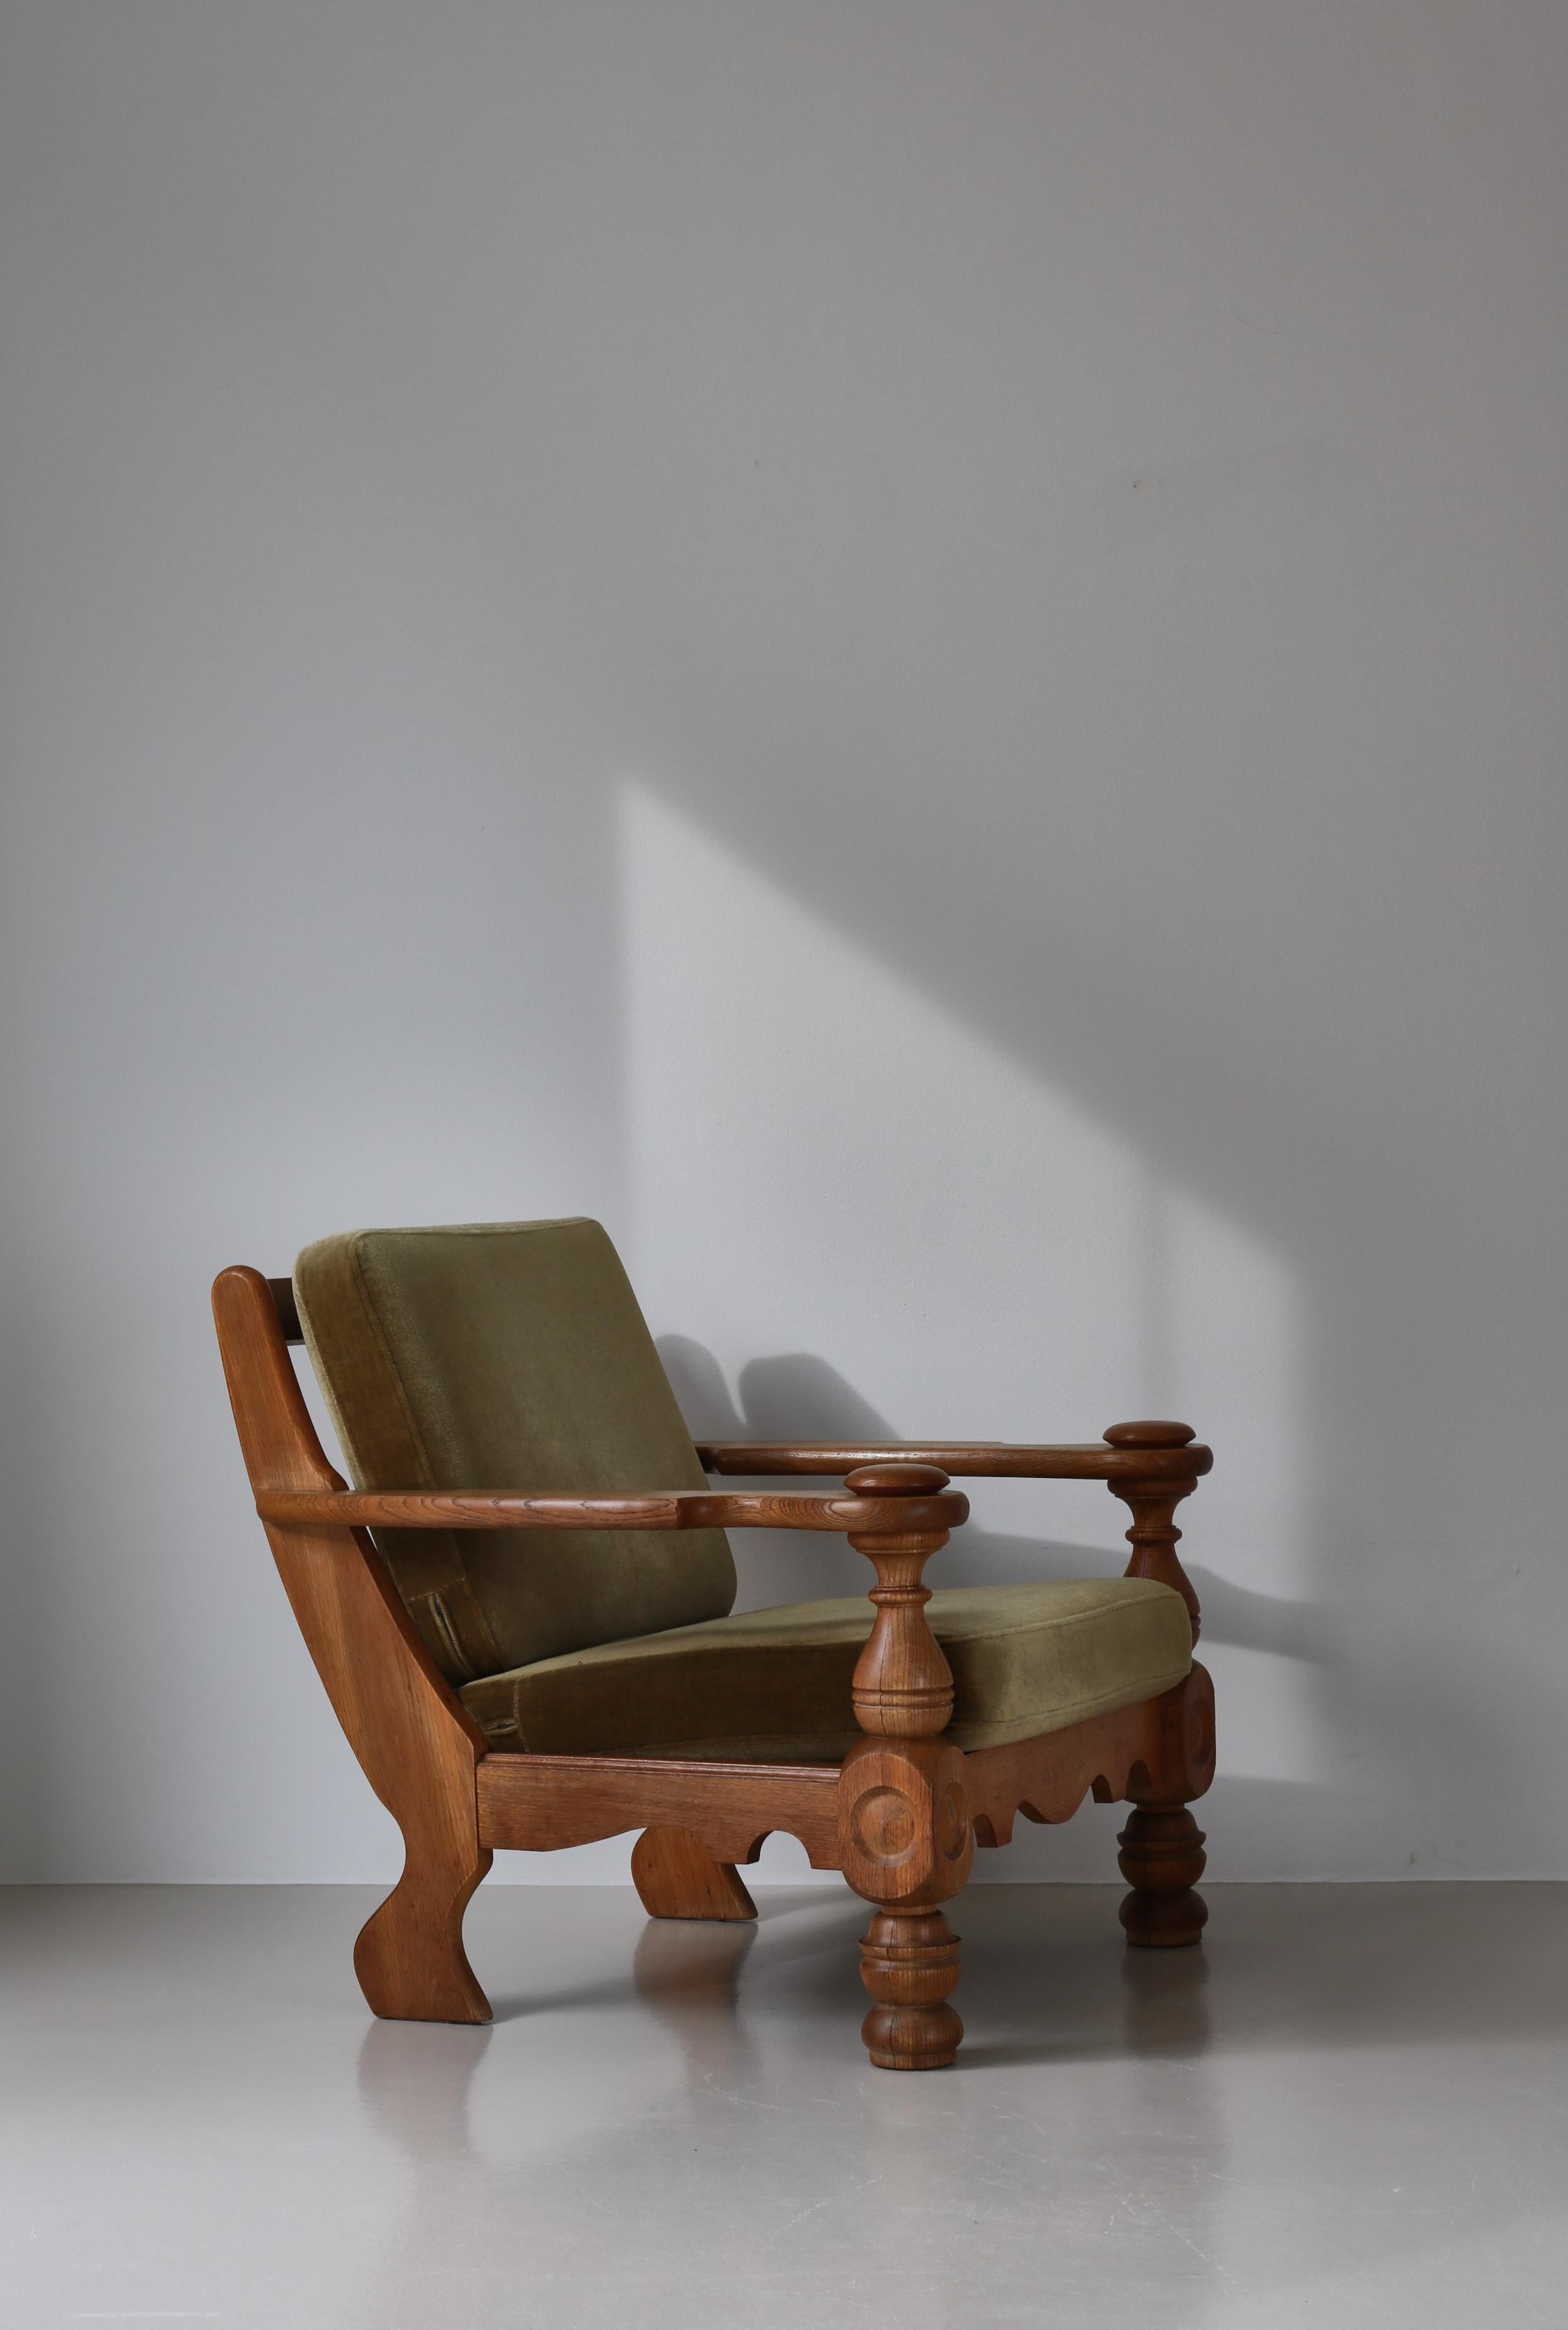 Very charming and rustic large easy chair designed by Henry Kjærnulf and manufactured in the 1950s. The chair is made of solid oak and the loose cushions are upholstered in green mohair. Great seating comfort.
Danish midcentury designer and